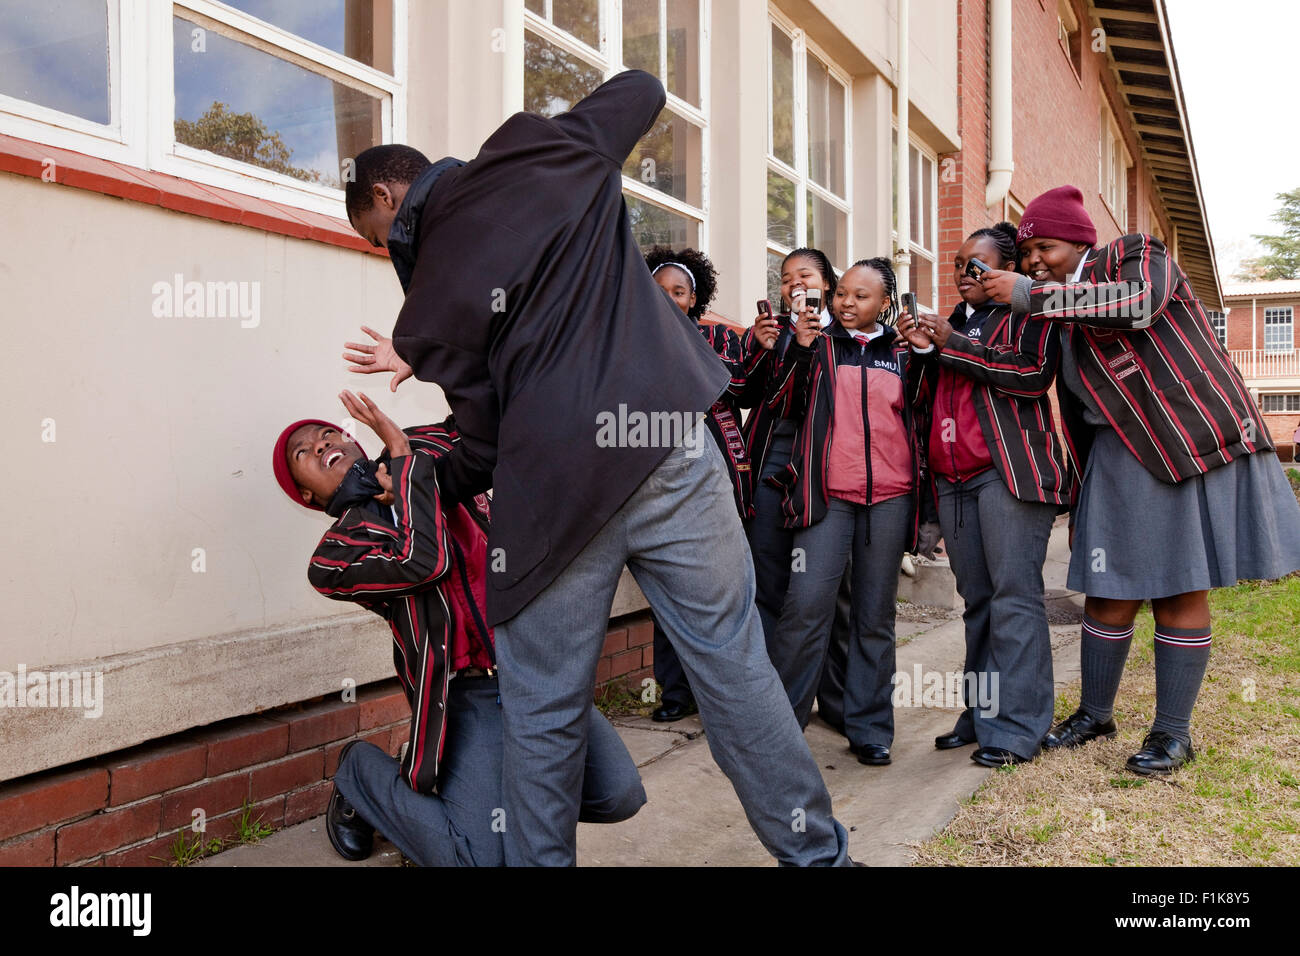 One male high school student beating up another while other students watch and film on their cellphones Stock Photo